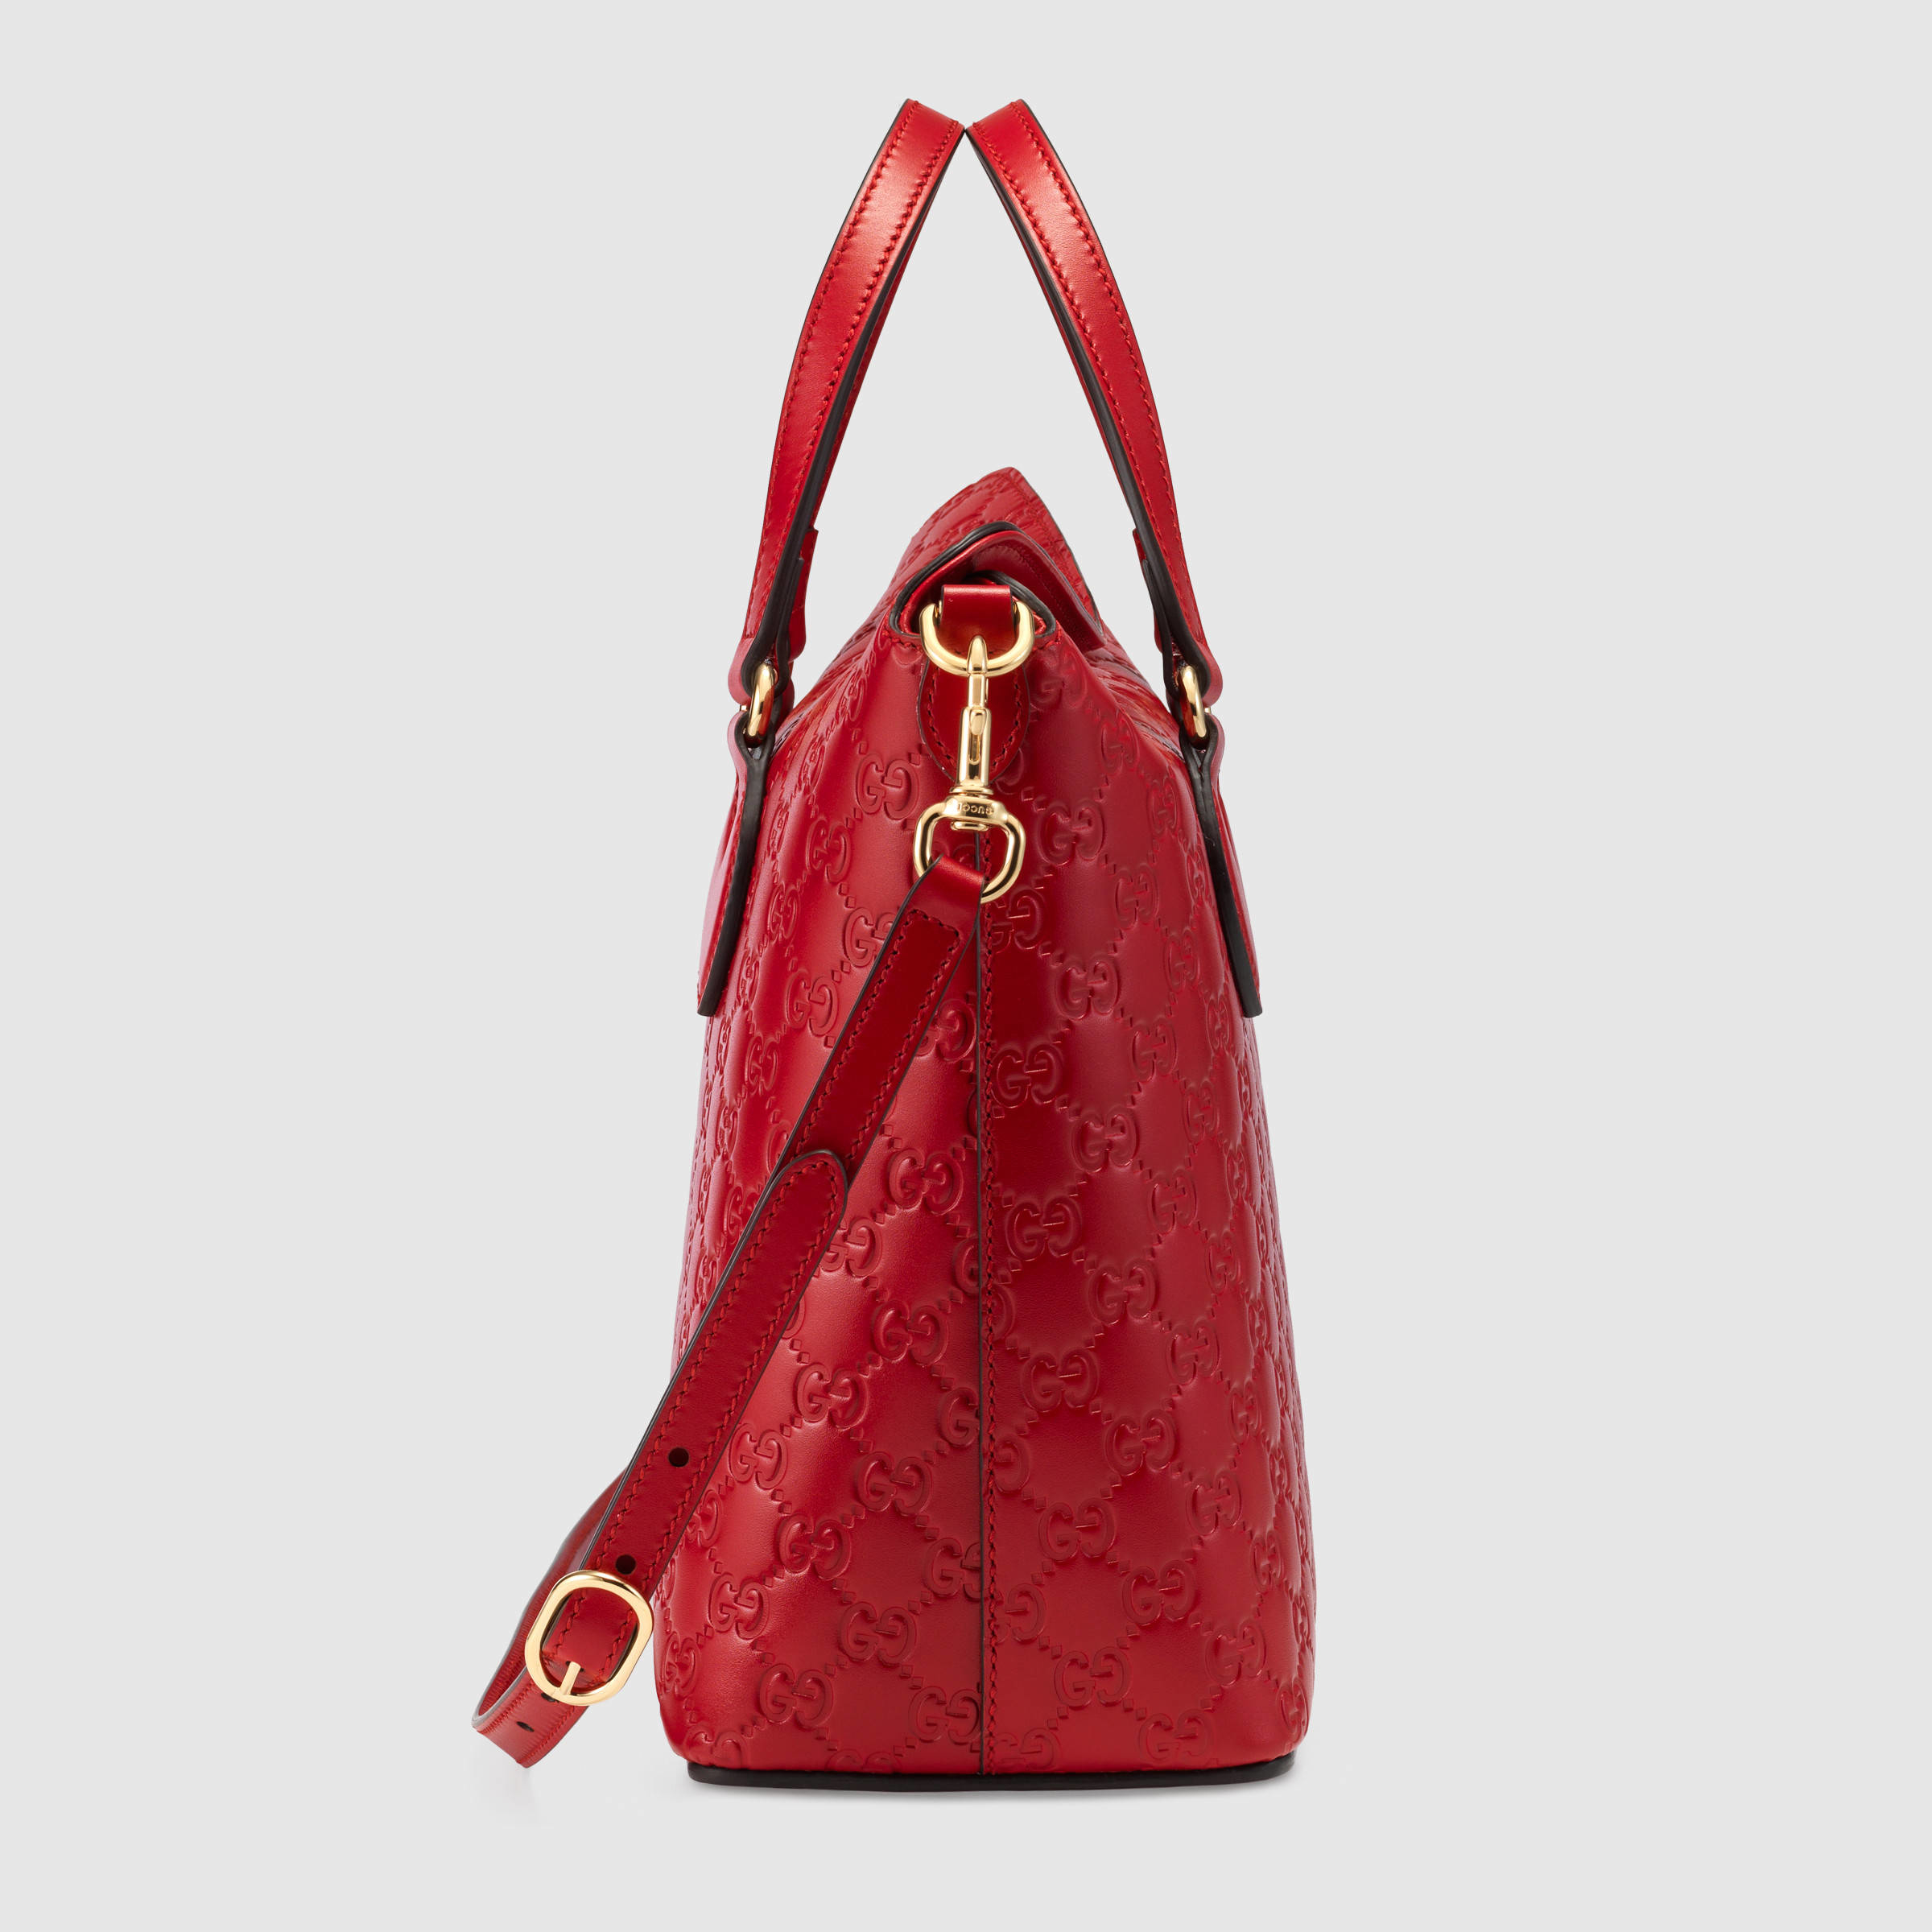 Gucci Signature Leather Top Handle Bag in Red - Lyst